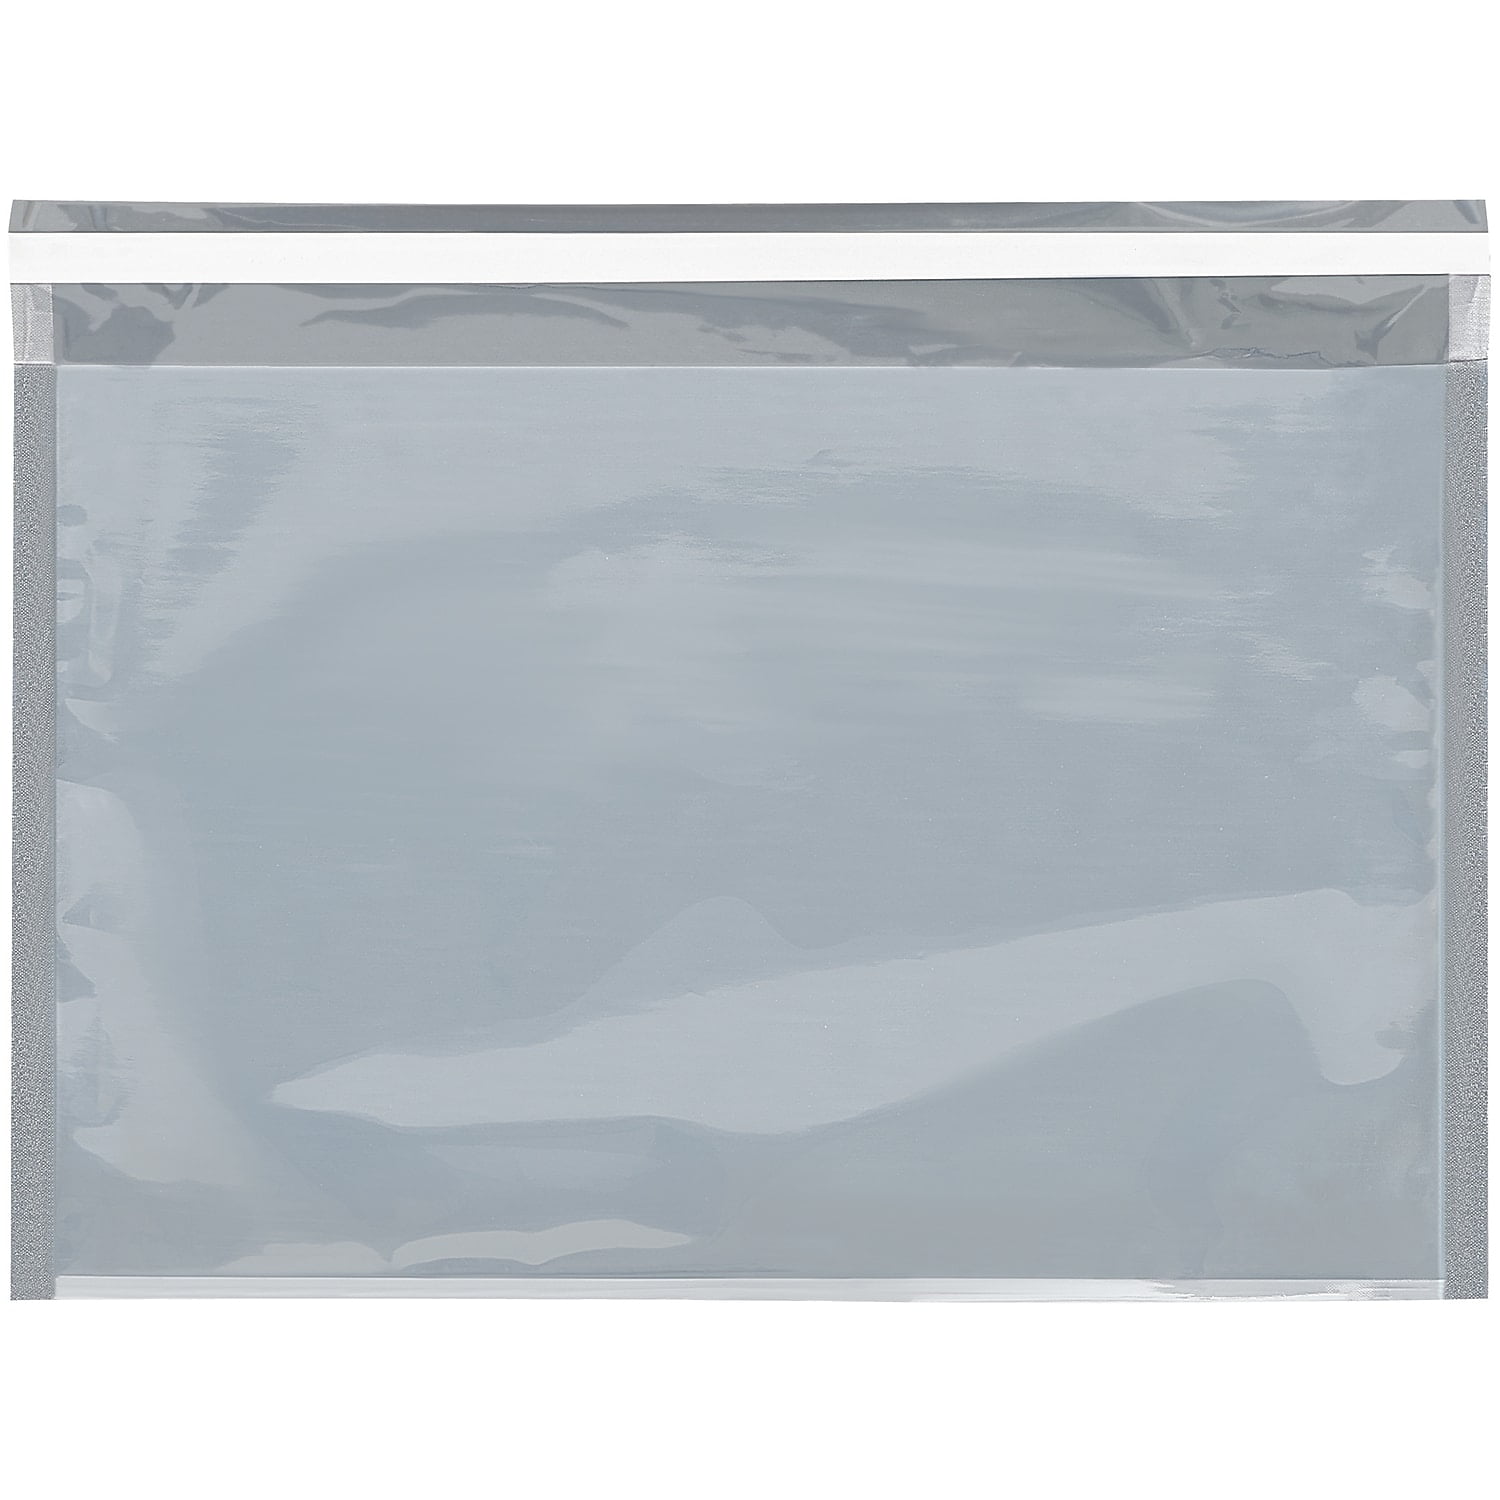 Picture of Box Partners GCV0912 9.5 x 12.75 in. Translucent Silver Glamour Mailers - Case of 250